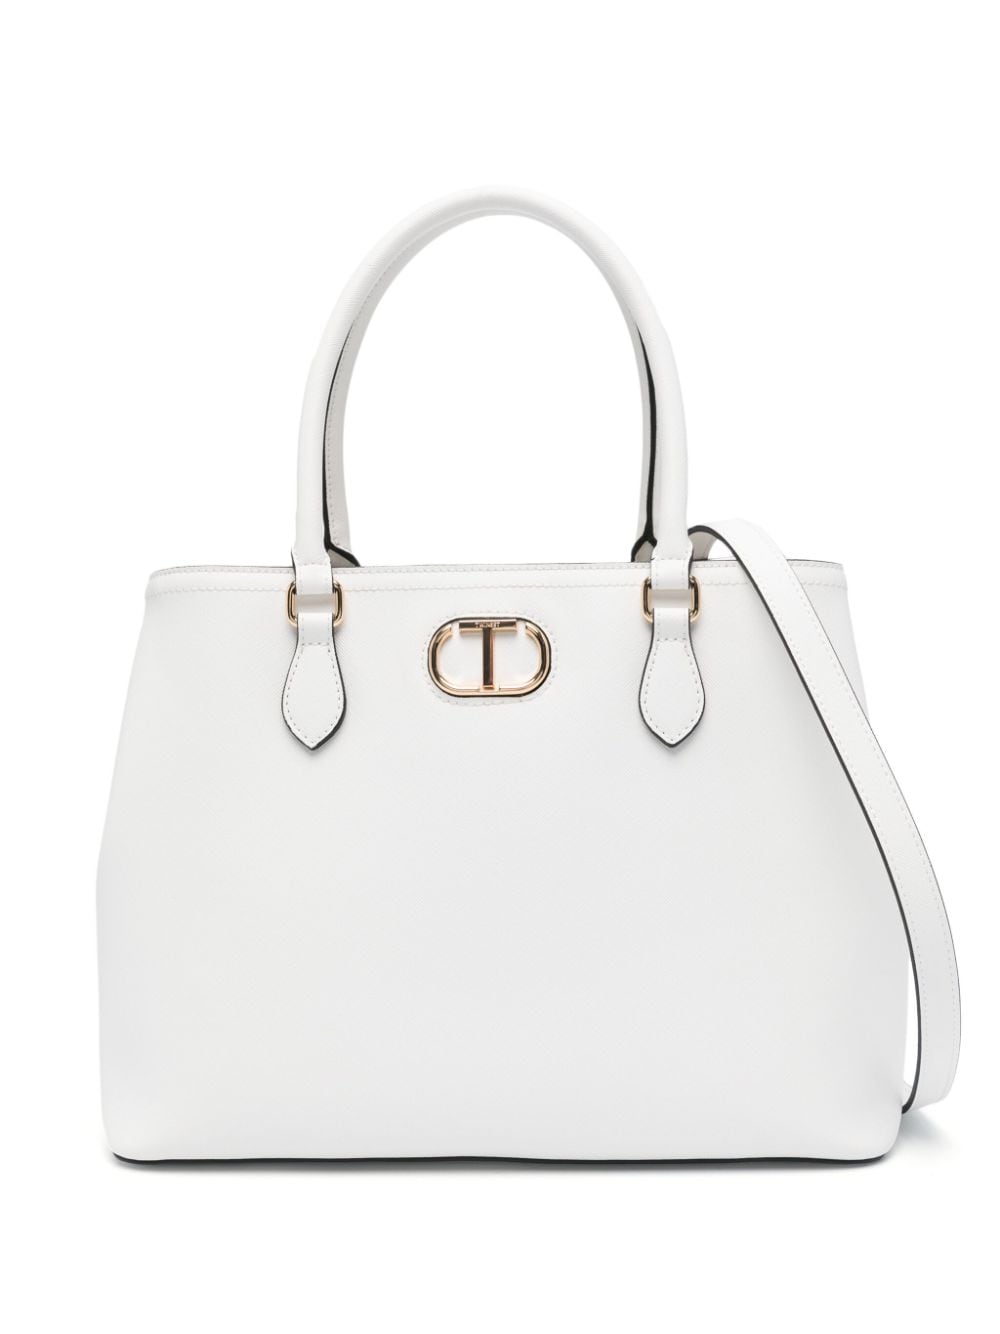 TWINSET Oval T tote bag - White von TWINSET